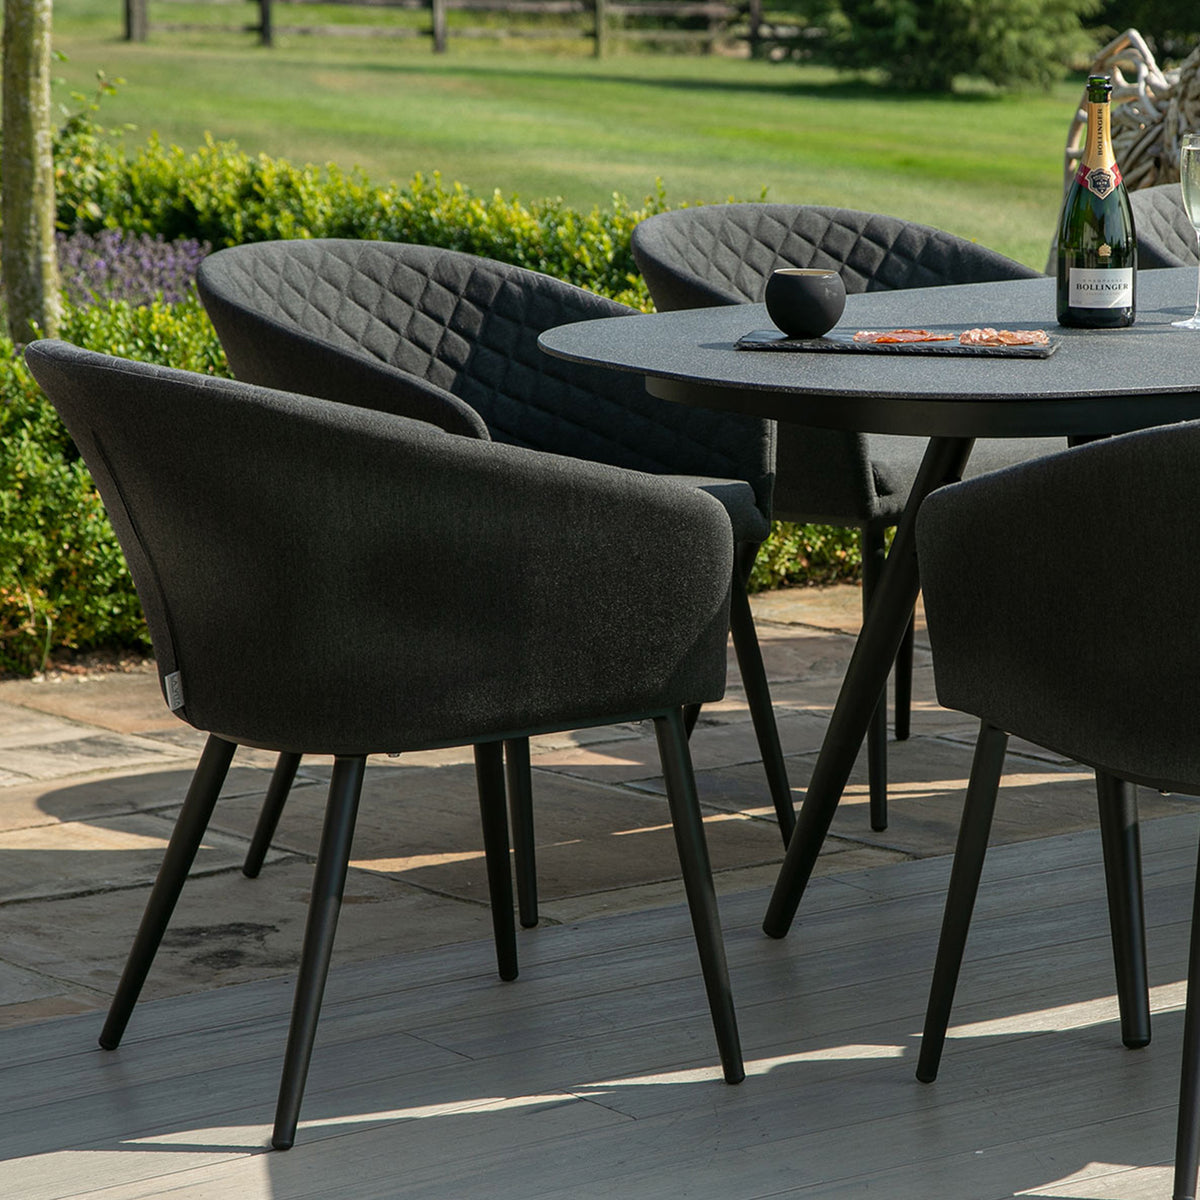 Maze Ambition Charcoal 8 Seat Outdoor Oval Dining Set